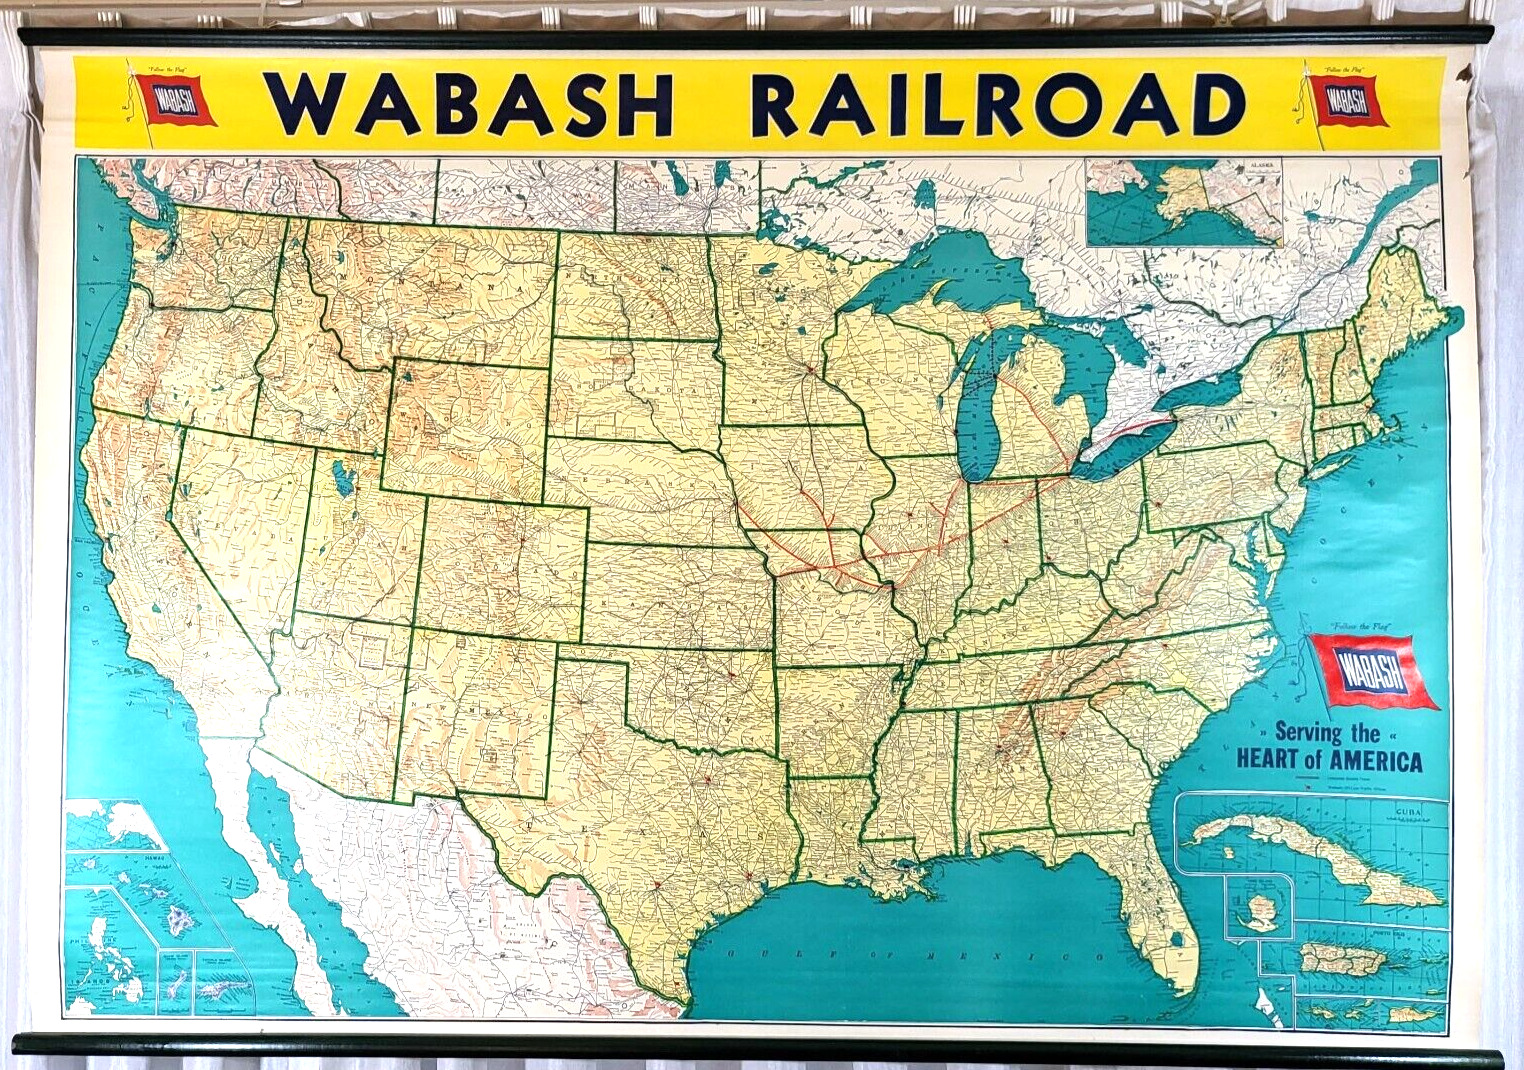 Rare Vintage Wabash Railroad 57 Inch X 40 Inch Wall Map - Not a Reproduction